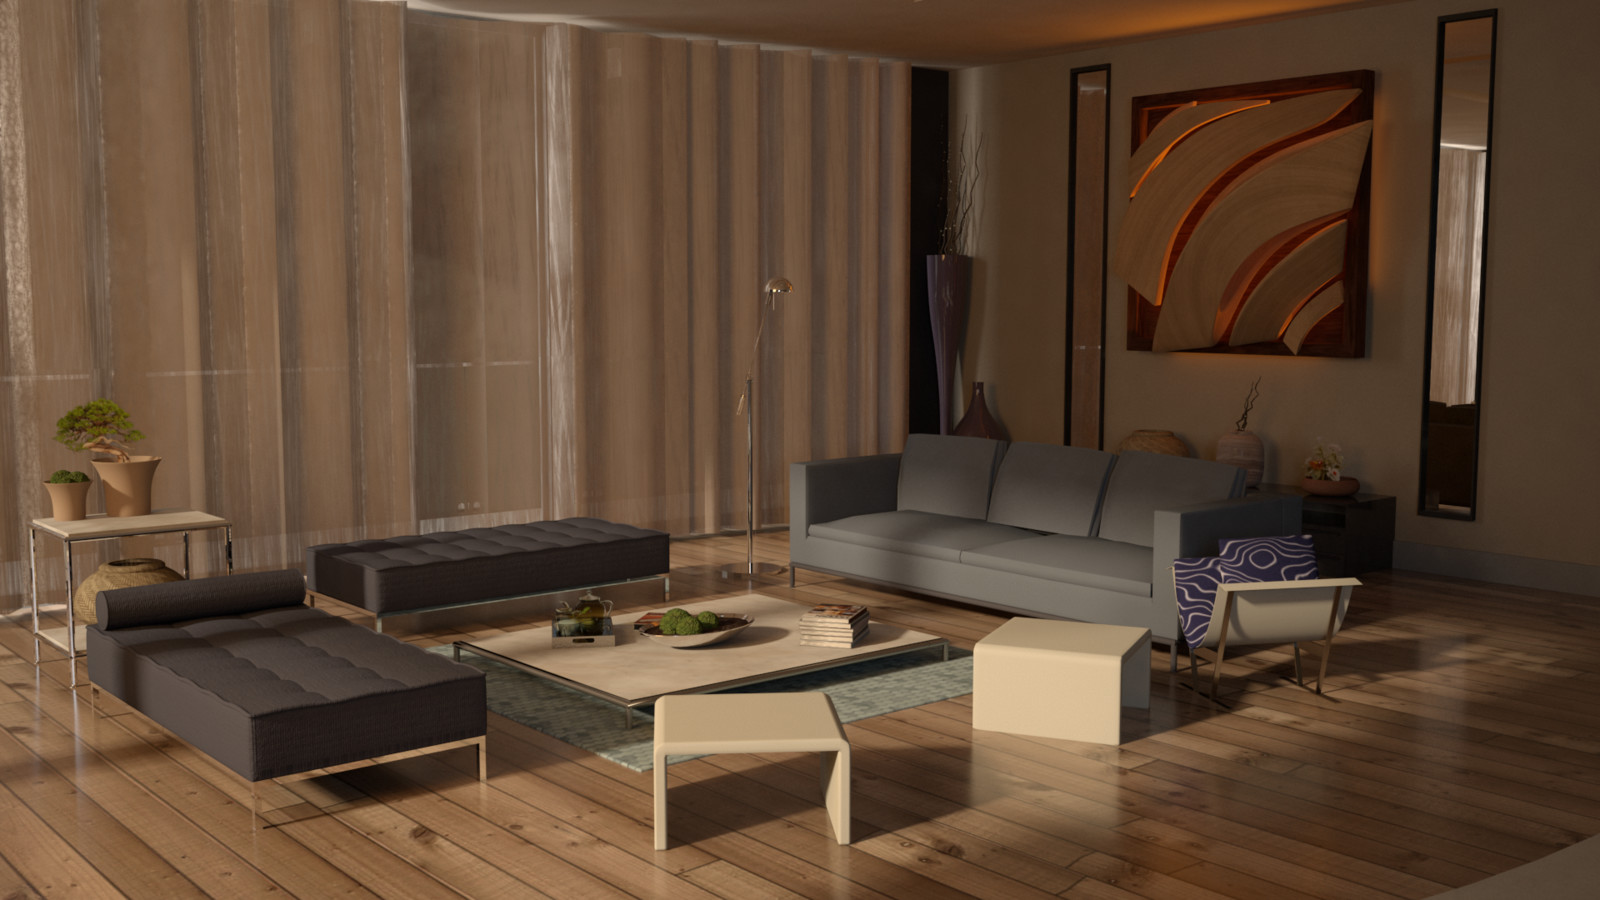 Final render of the room's wide shot. I'd opted for a softer mid-afternoon to early evening light instead to accentuate the wall art. 